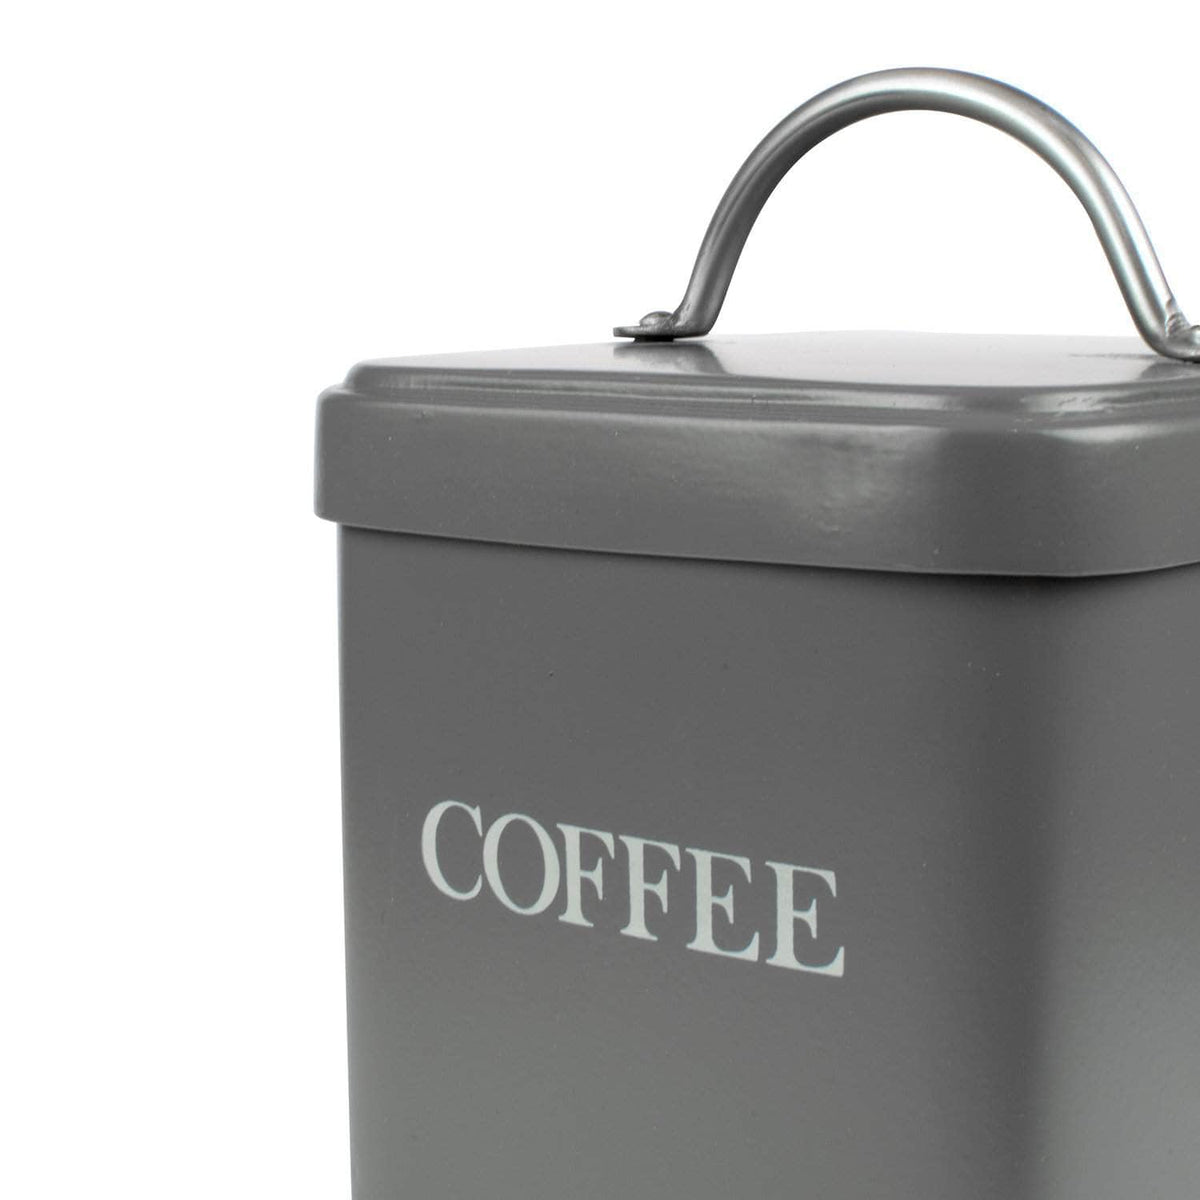 Coffee canister in charcoal